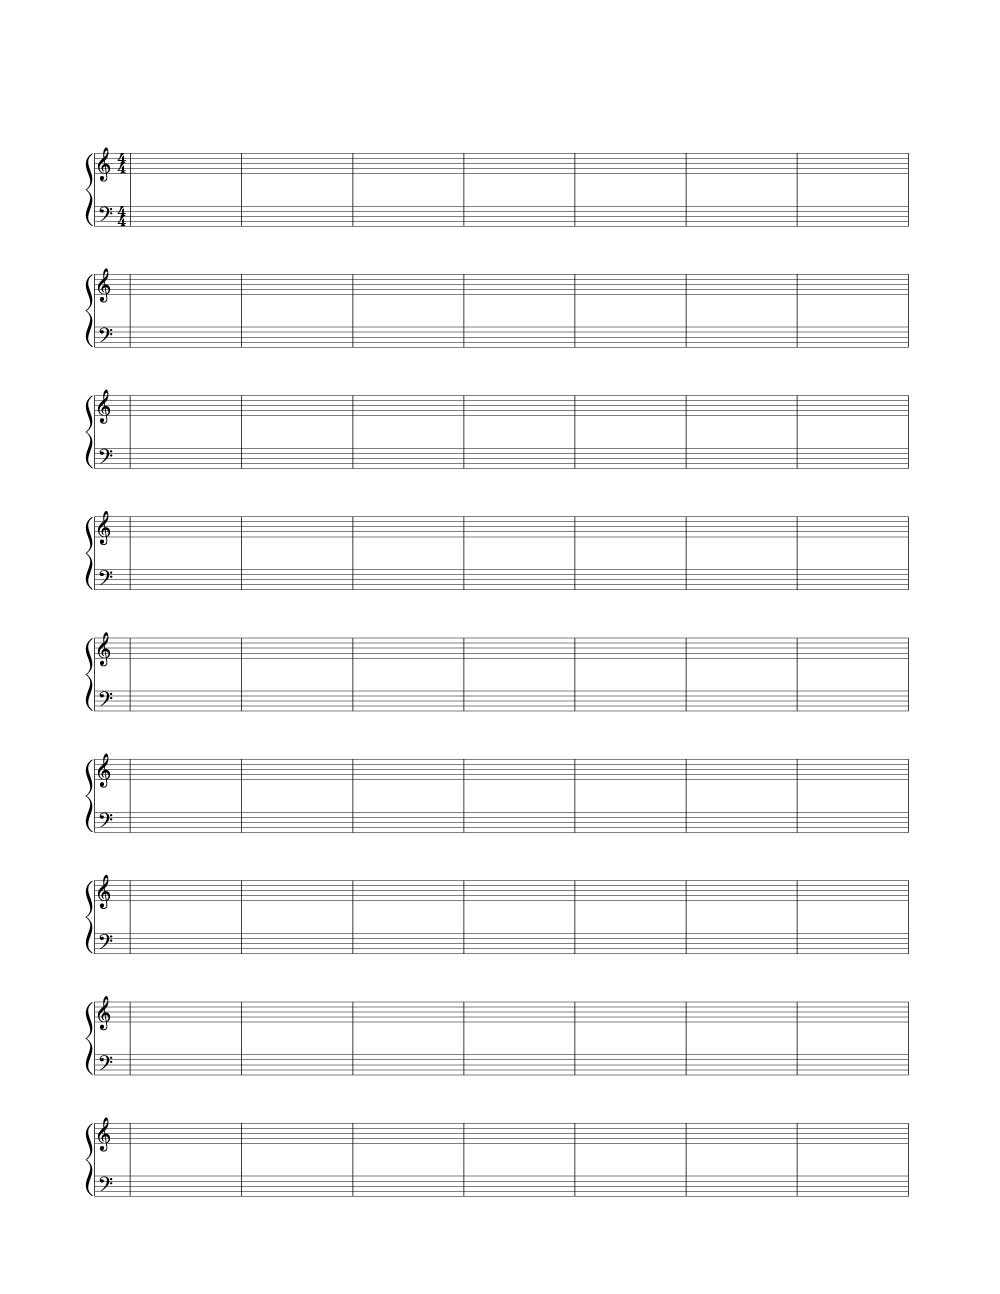 4/4 Time Signature Double Bar Blank Sheet Music | Woo! Jr With Blank Sheet Music Template For Word